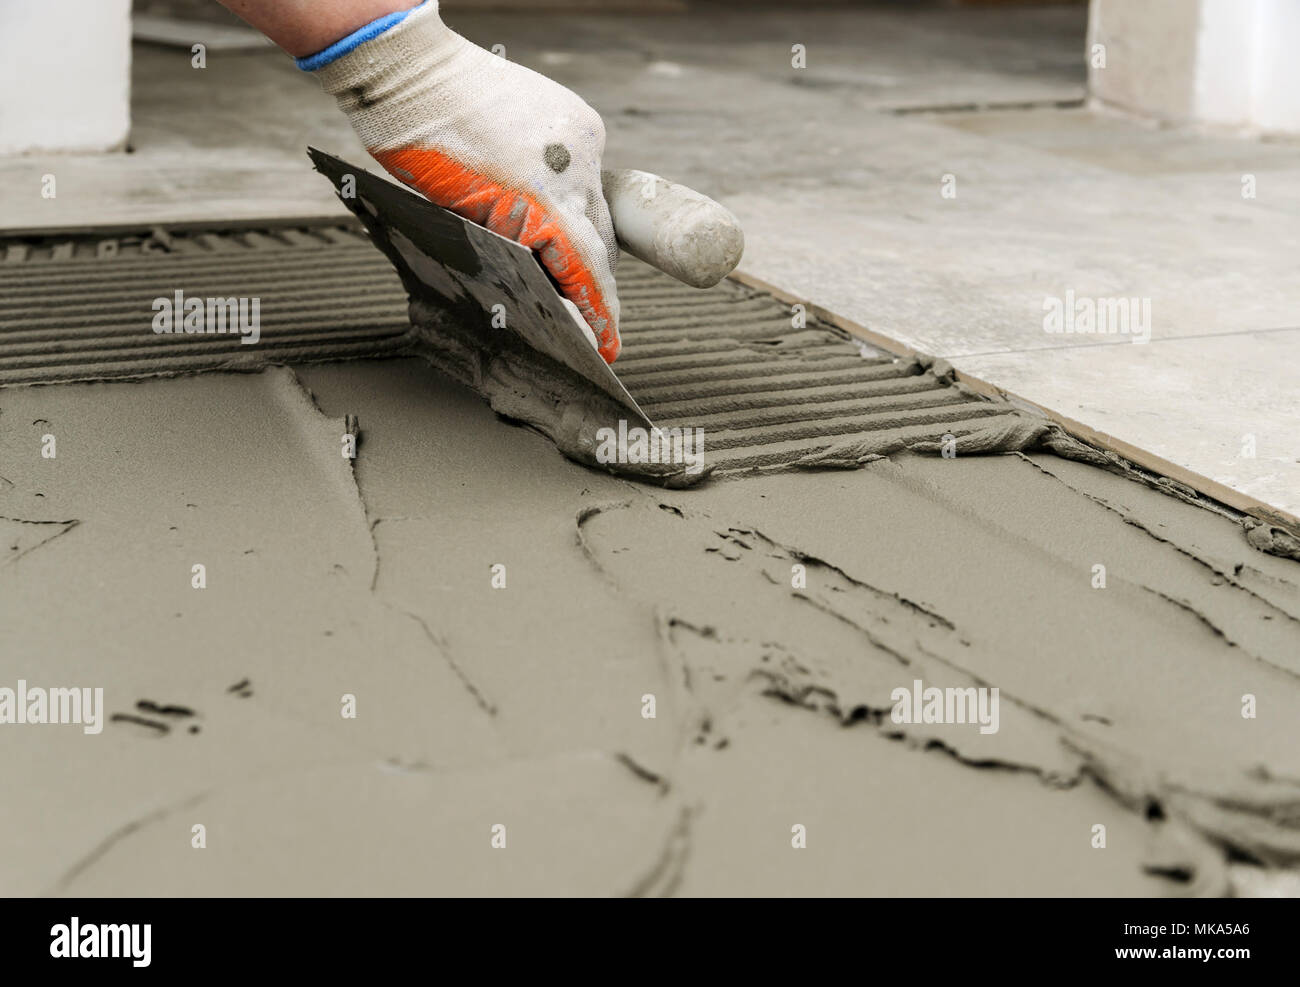 Laying Ceramic Tiles Troweling Mortar Onto A Concrete Floor In